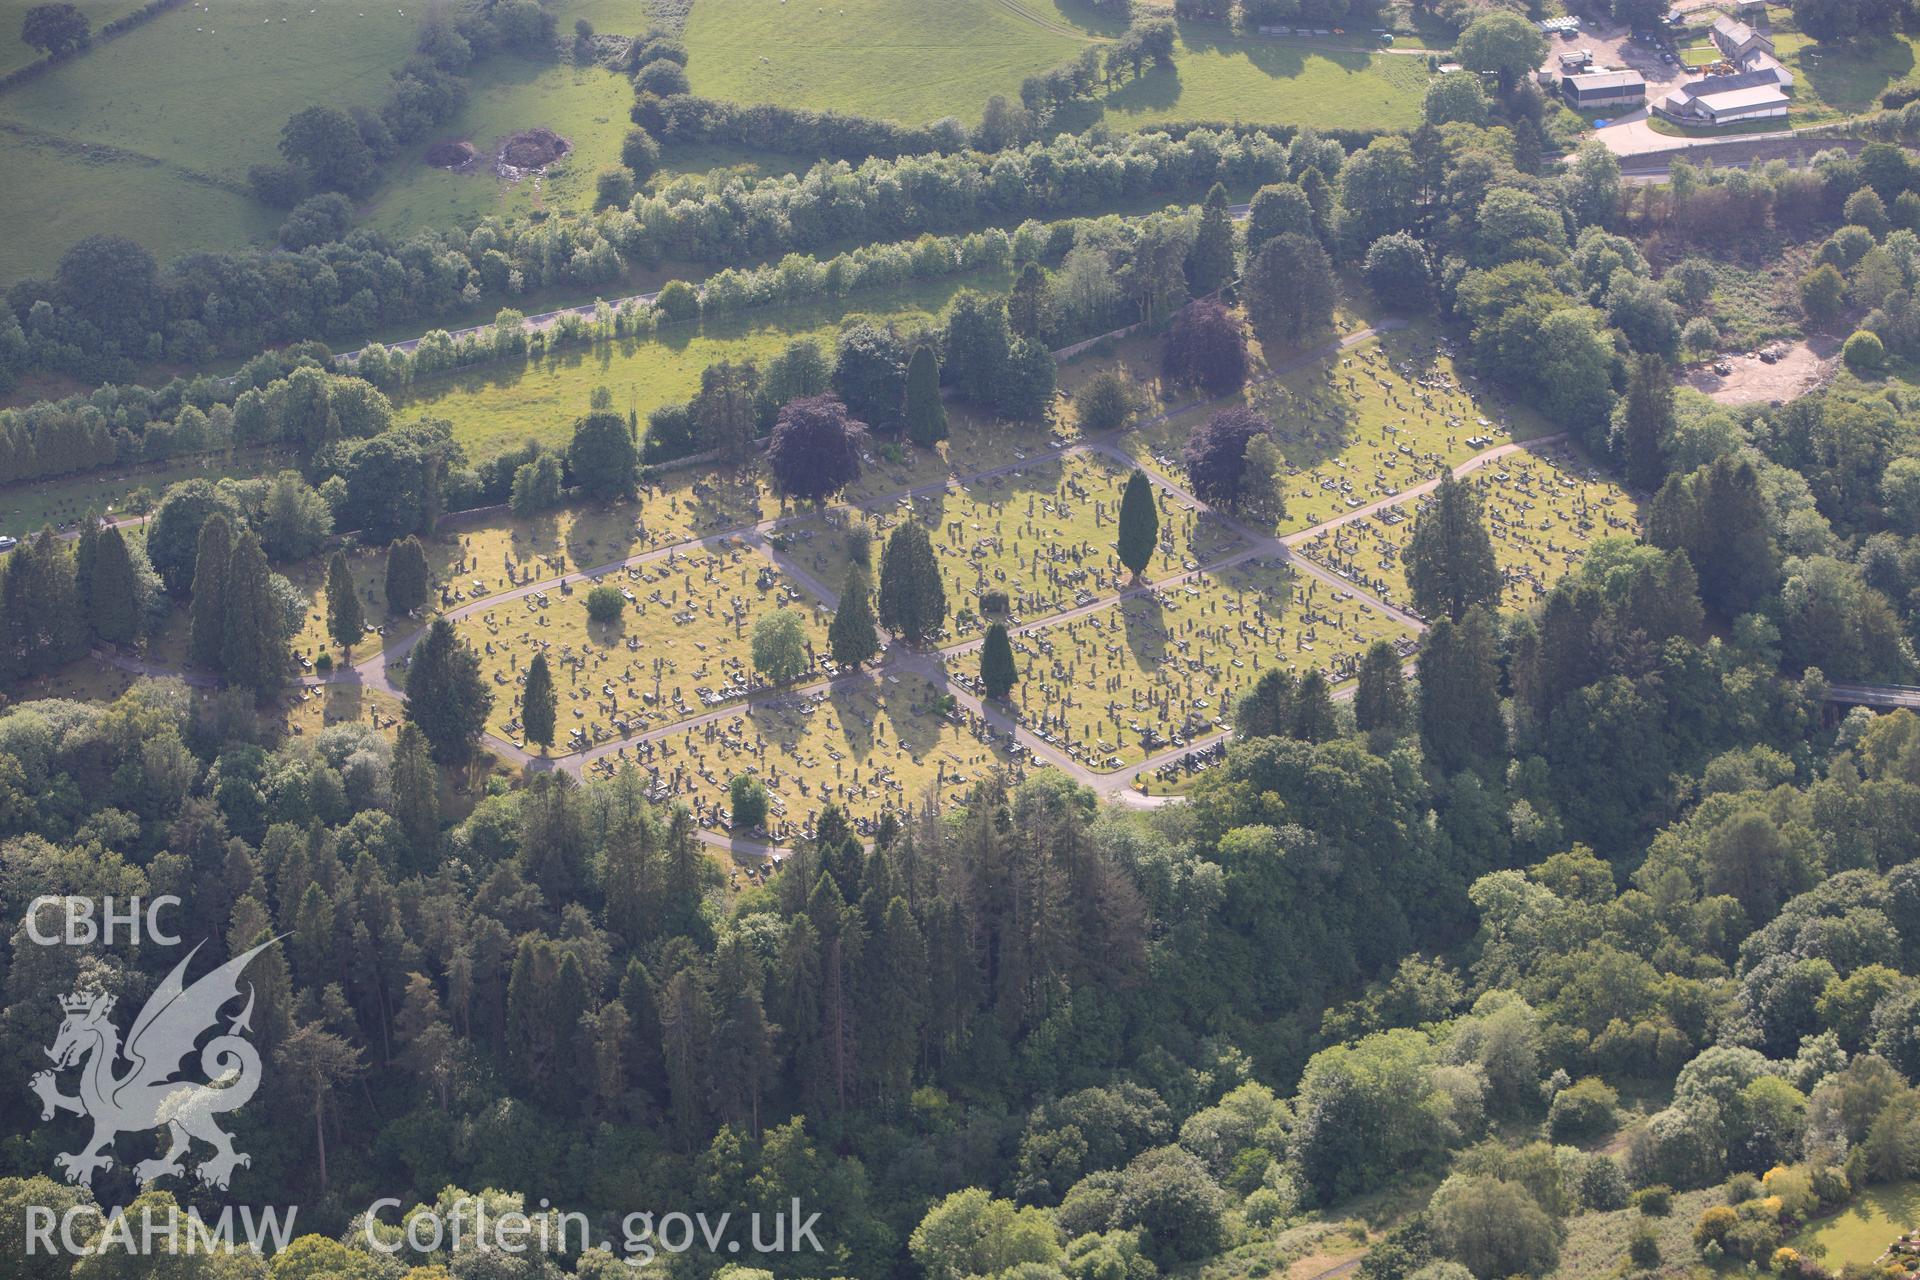 RCAHMW colour oblique photograph of Cefn-Coed-y-Cwmmer cemetery. Taken by Toby Driver on 13/06/2011.